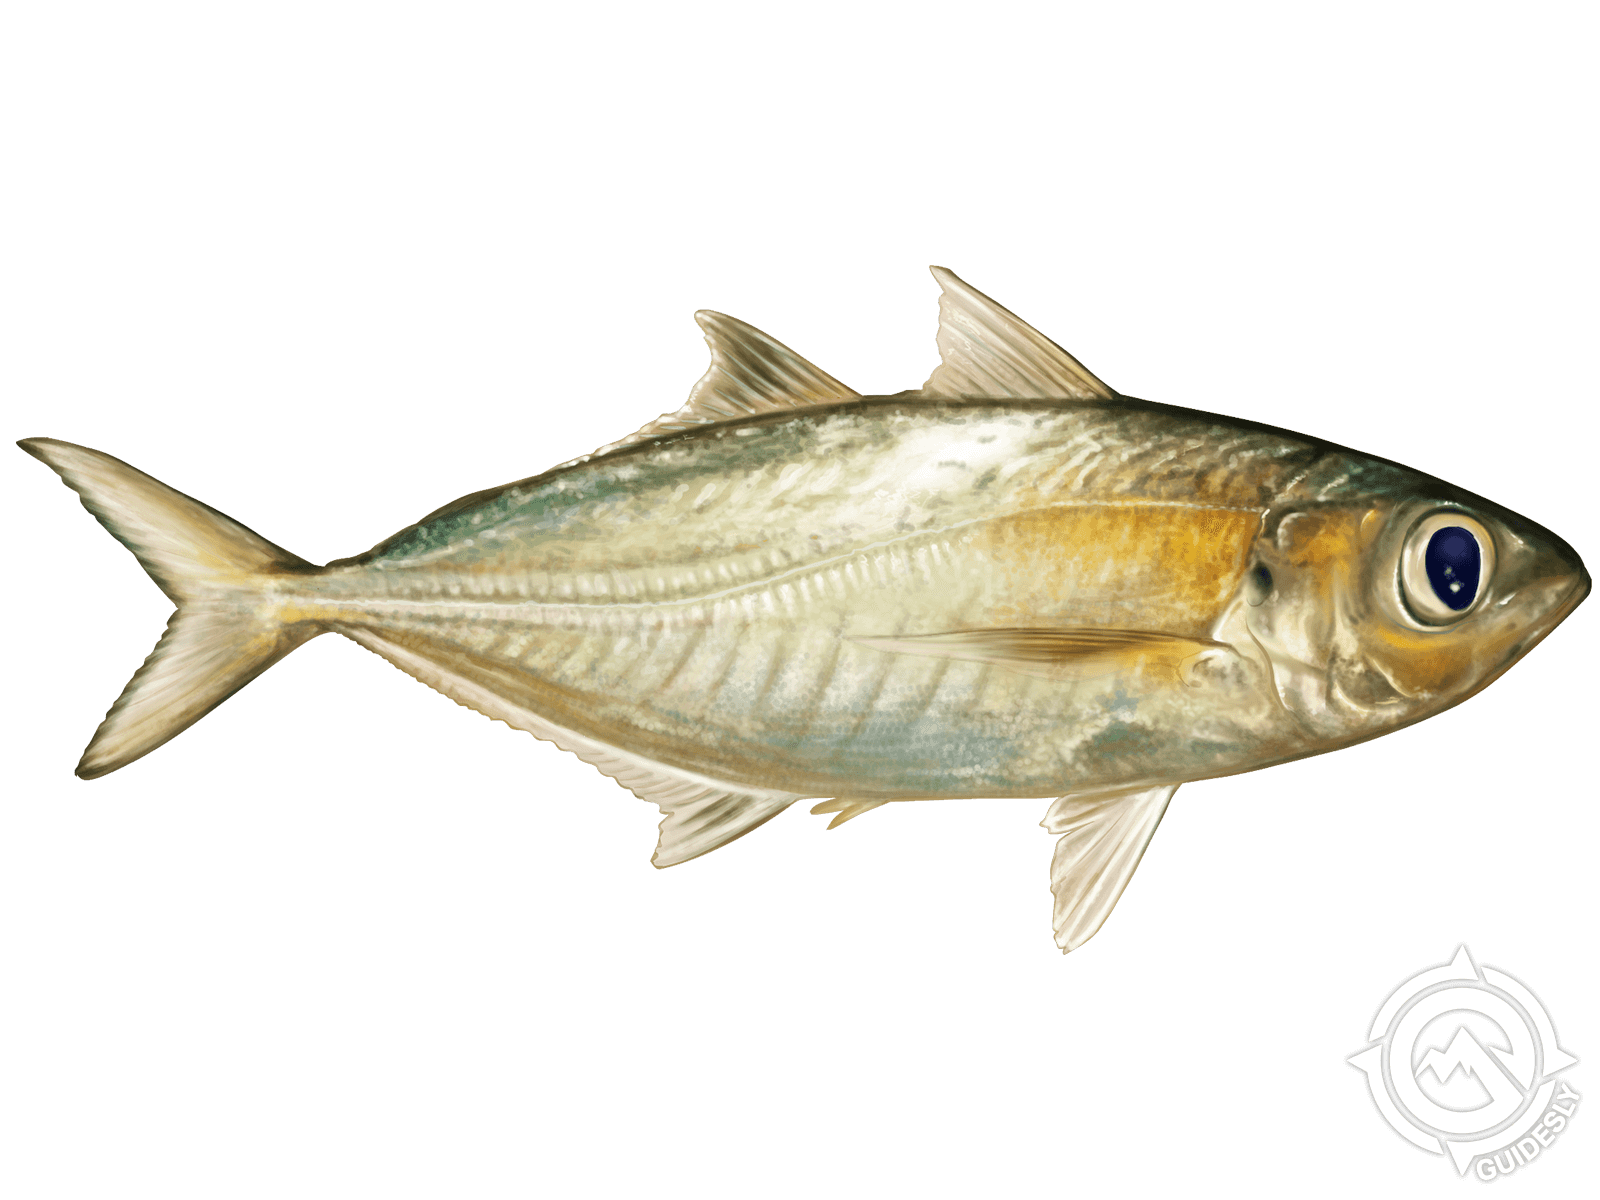 Bigeye Snapper- Facts and Photographs